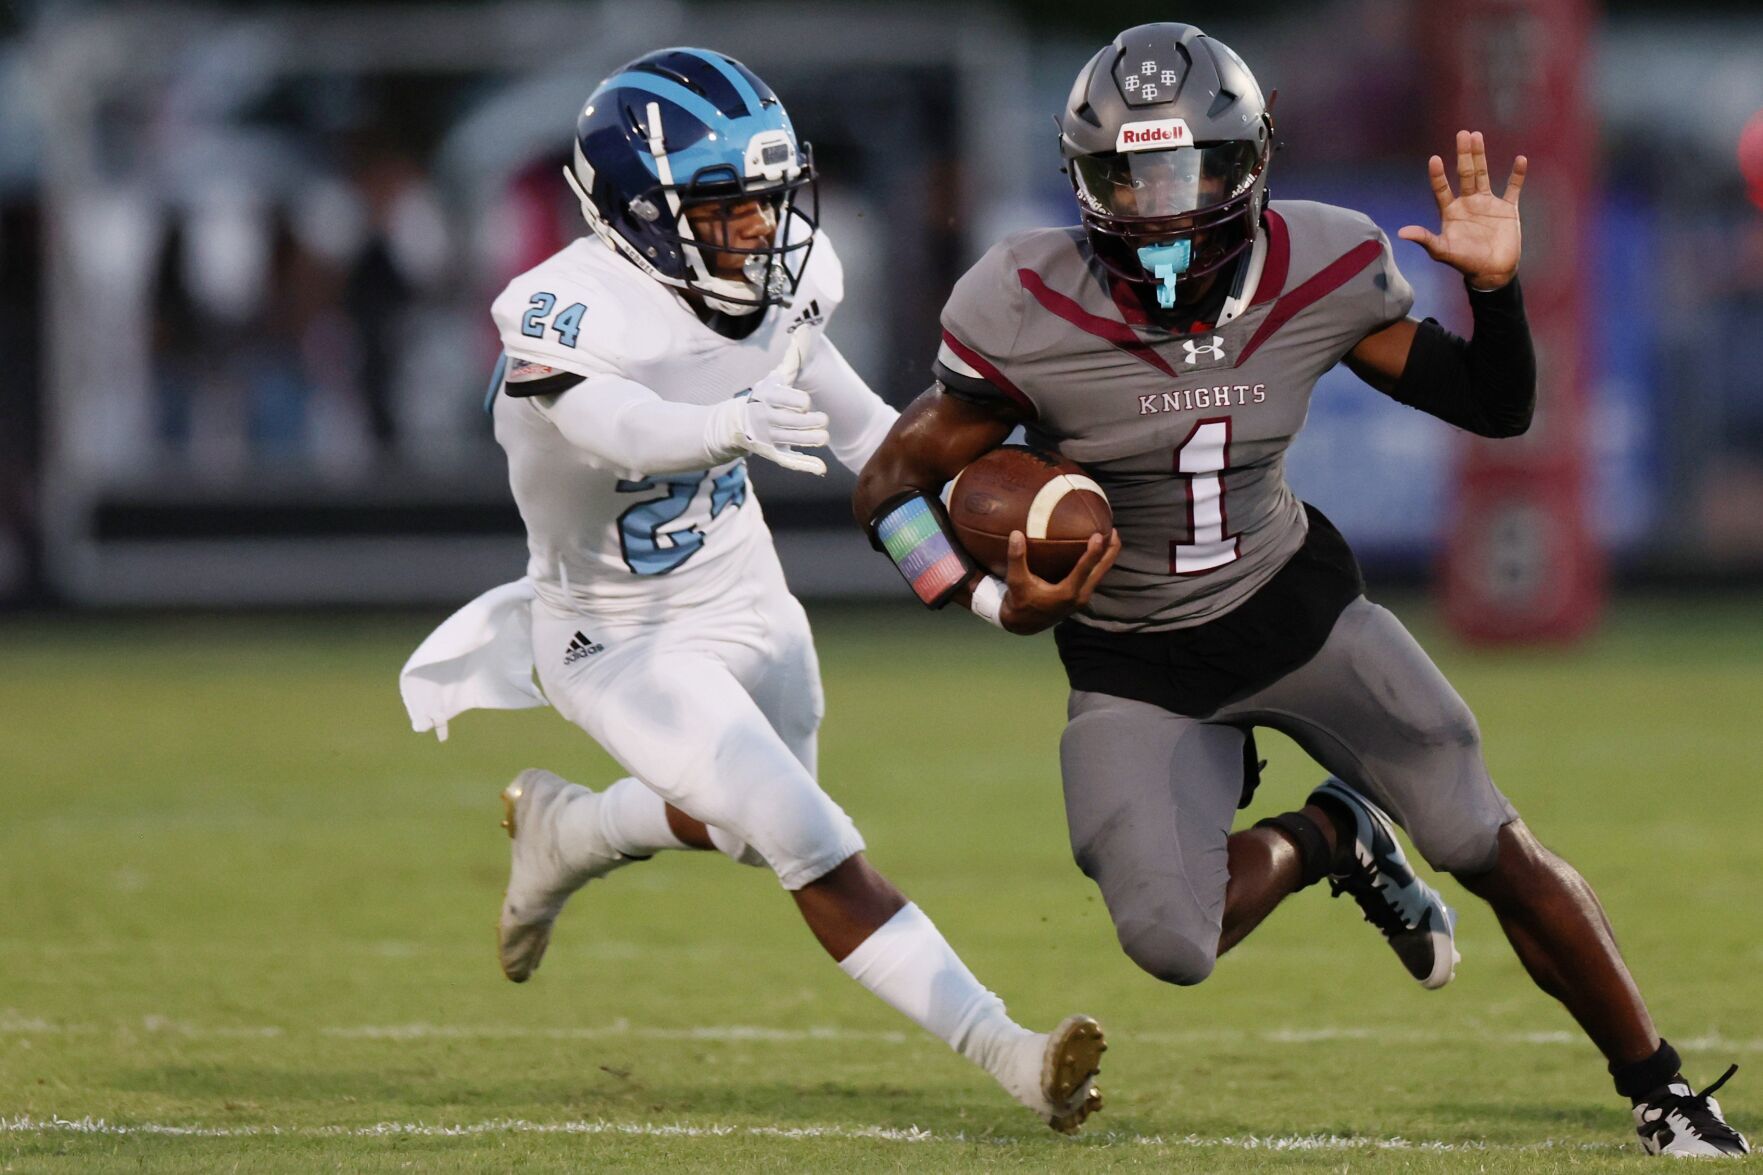 Thomas Dale Overcomes Rough First Half to Secure 28-24 Comeback Win against Hopewell